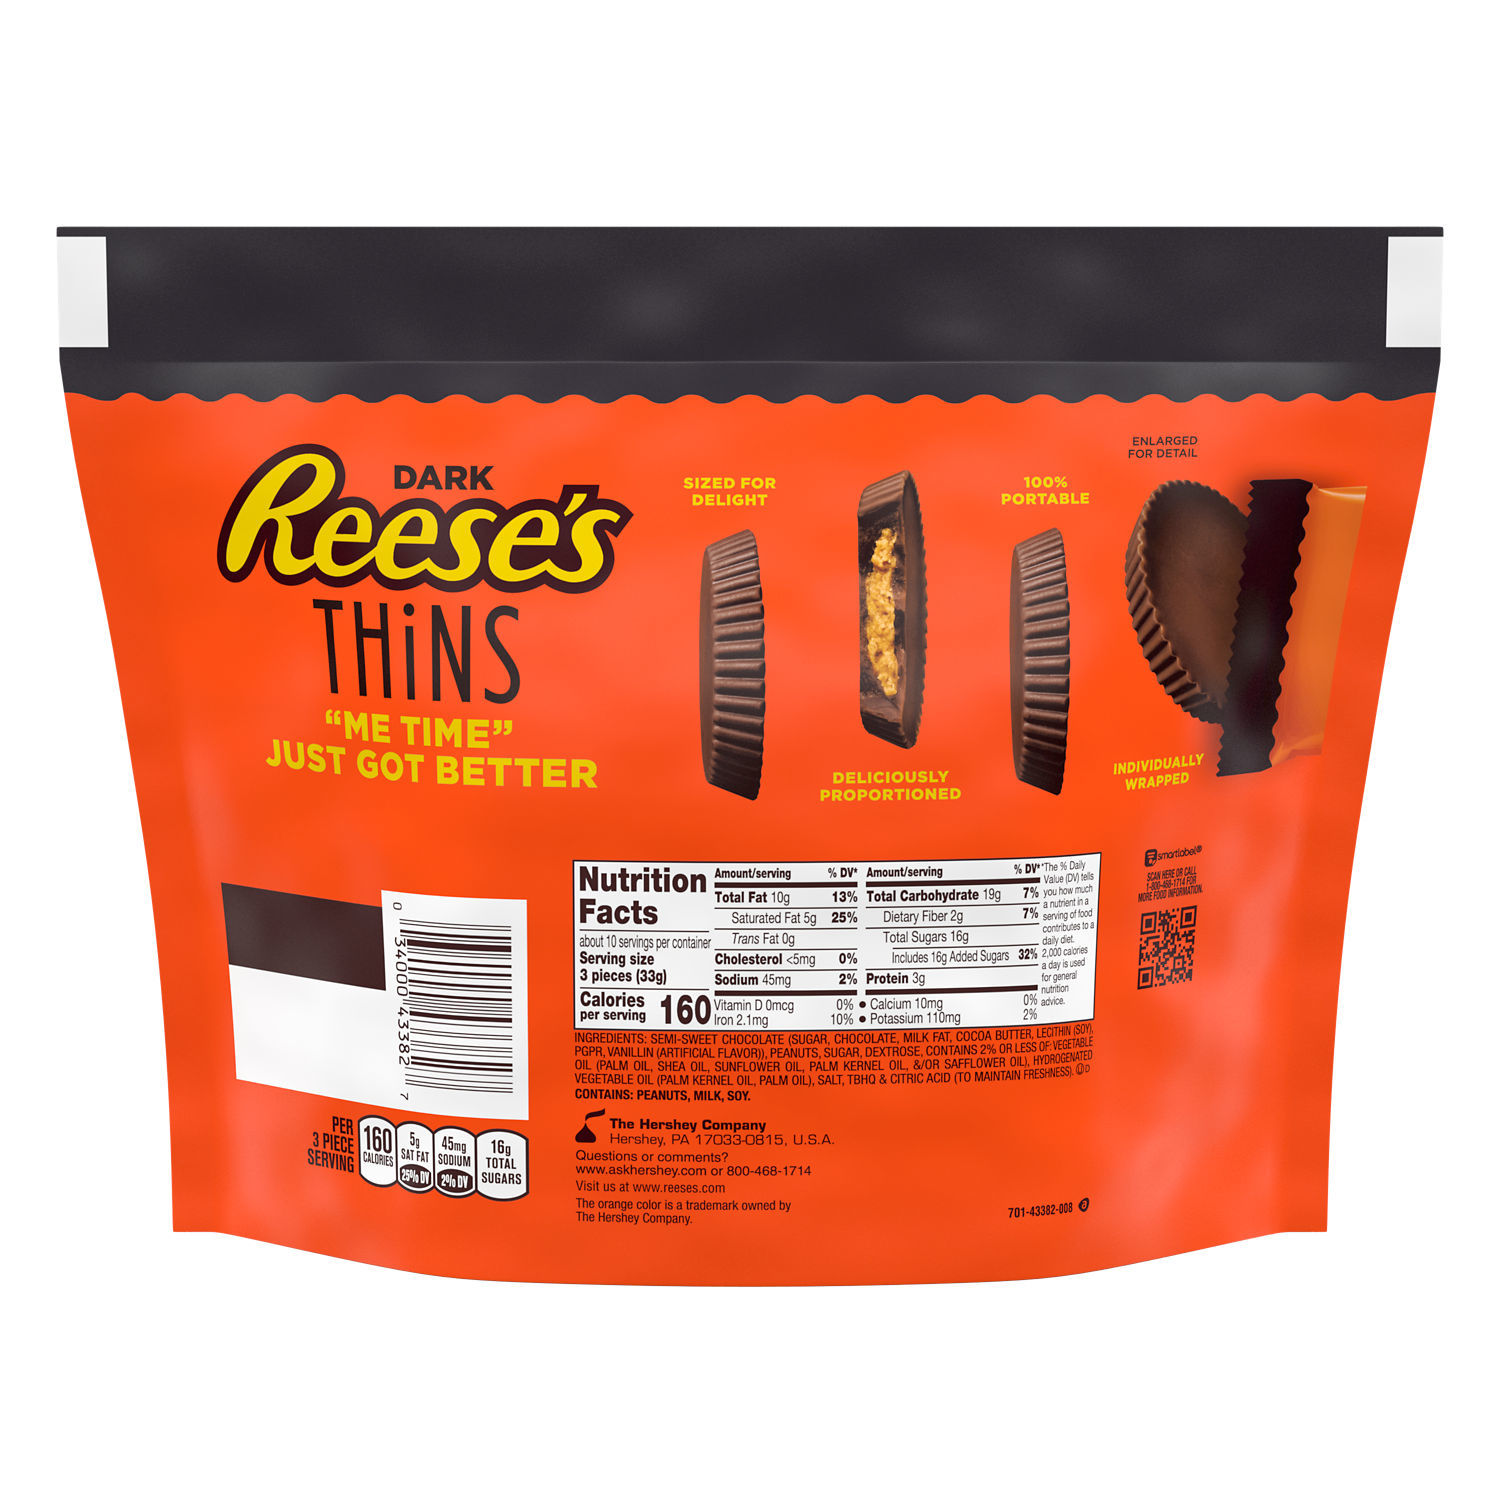 Reese's Thins Dark Chocolate Peanut Butter Cups Candy, Family Pack 12.03 oz - image 2 of 8